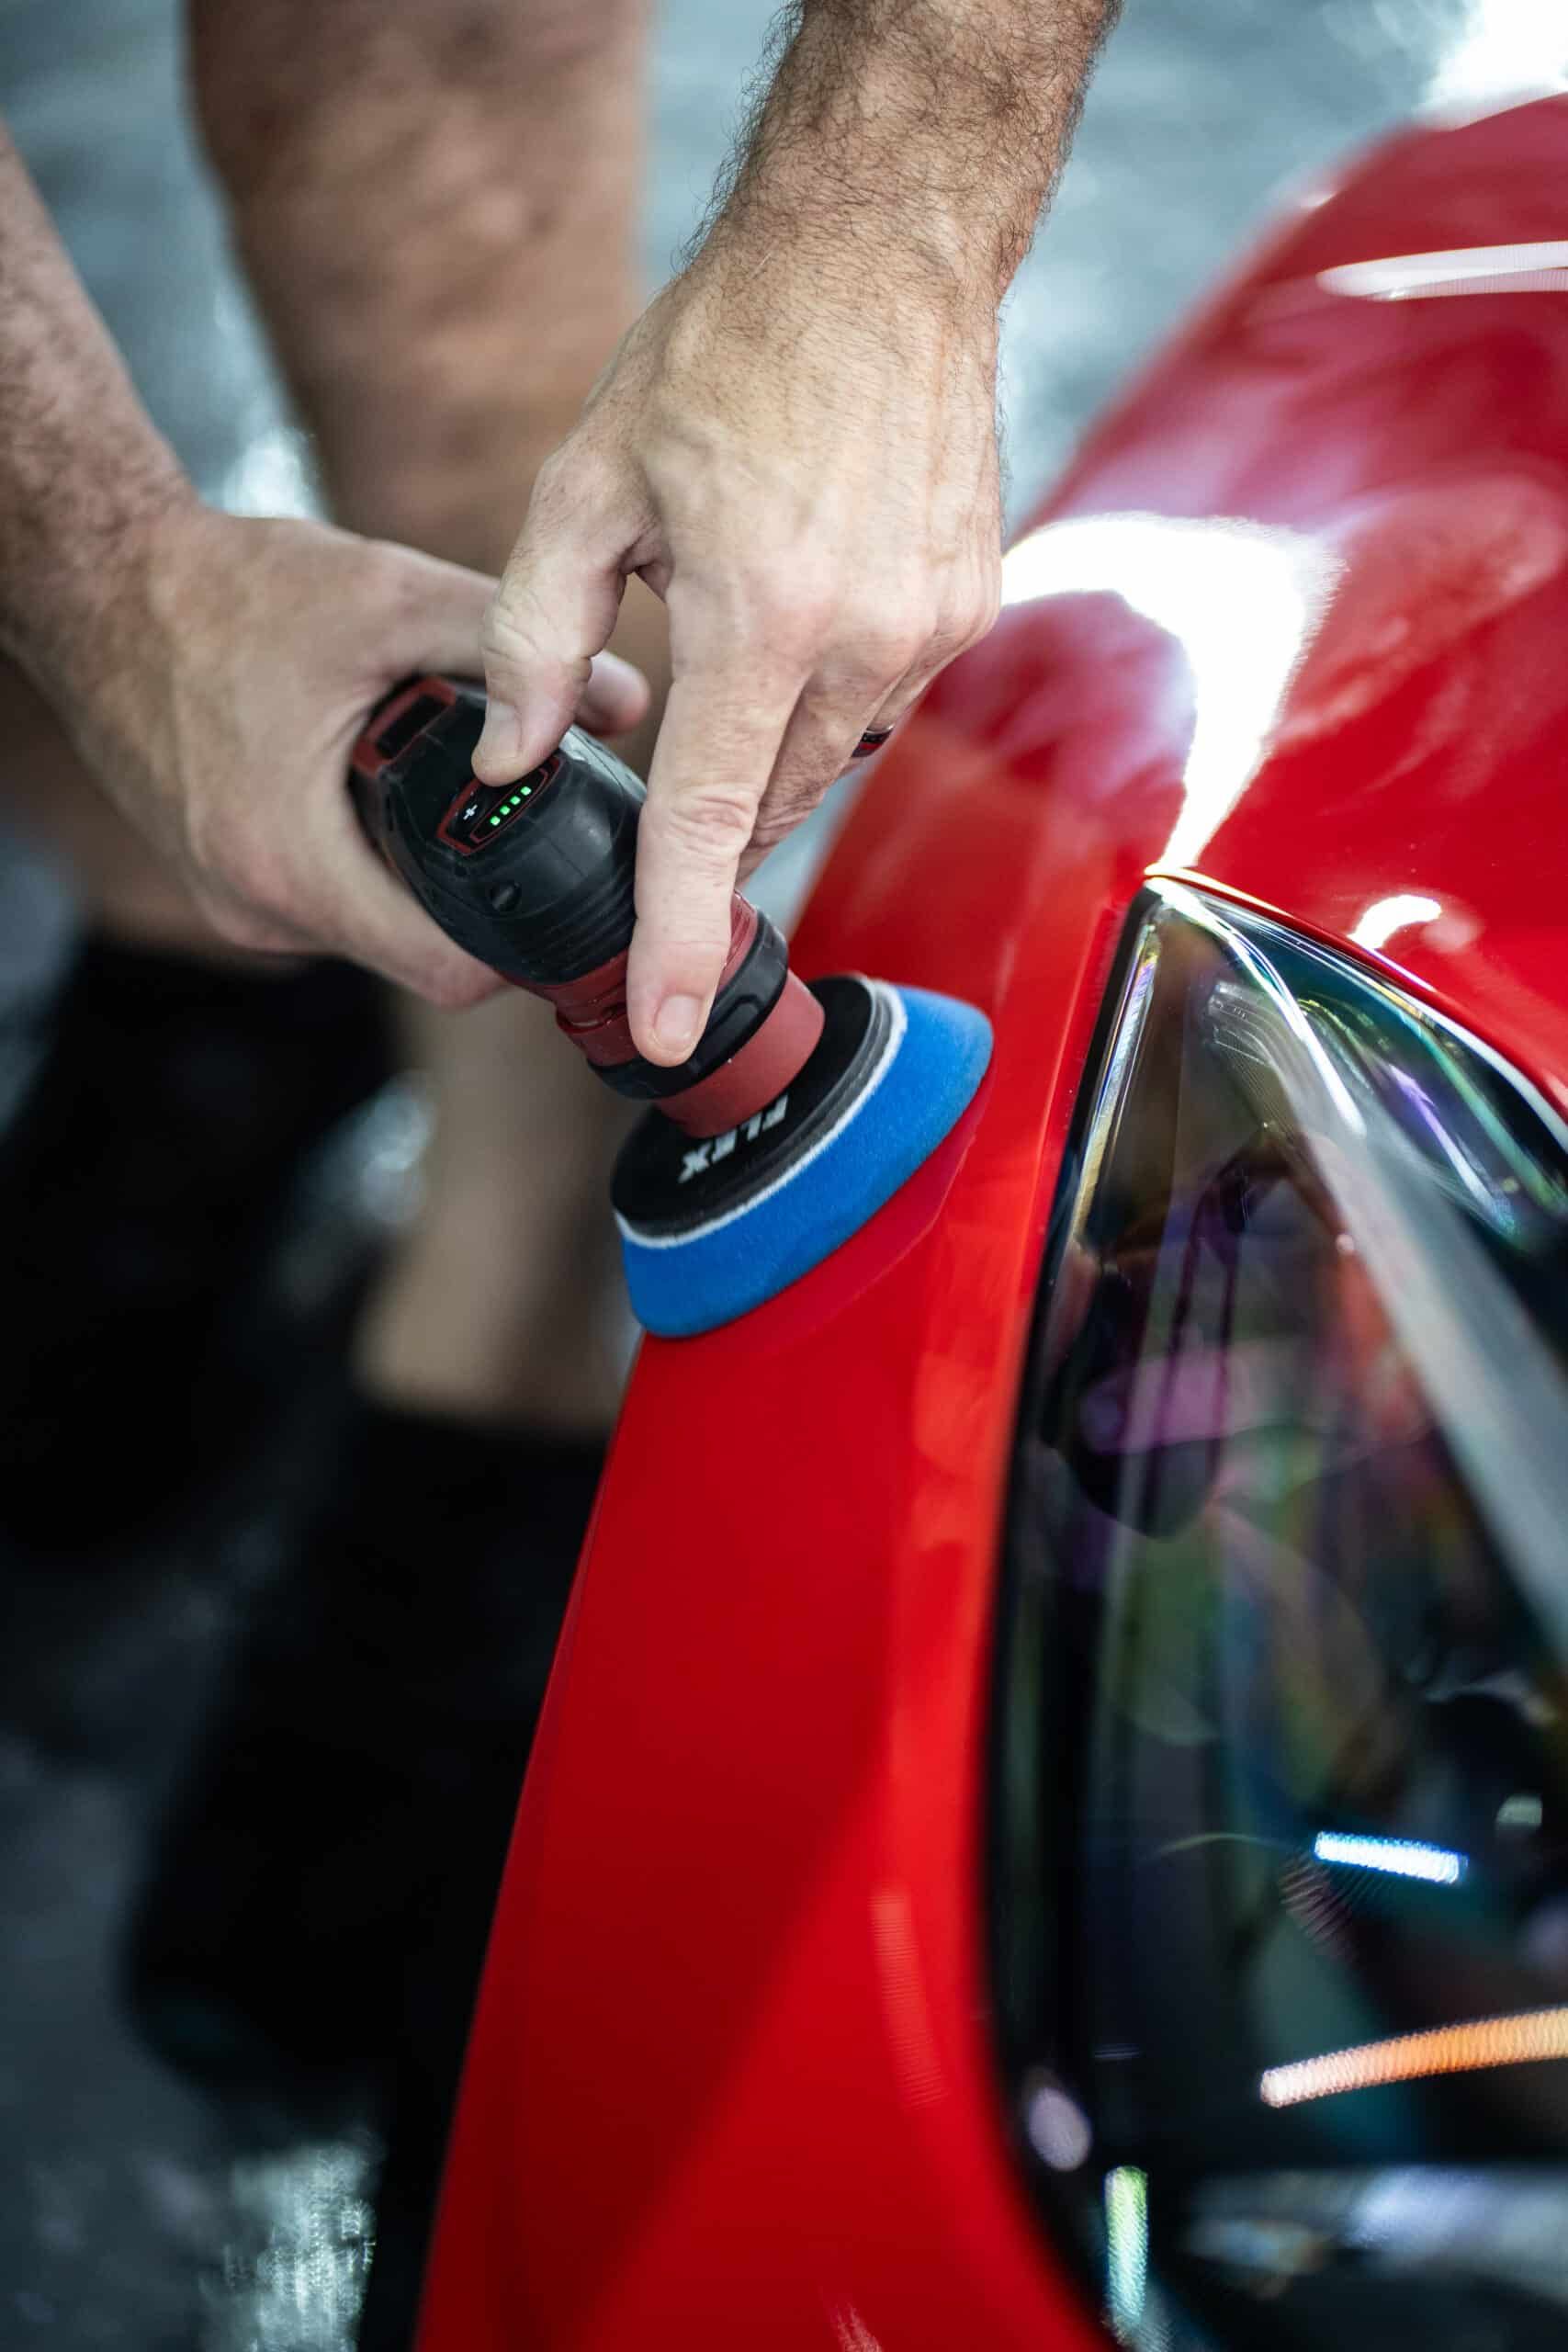 A man is polishing a red car with a polisher.